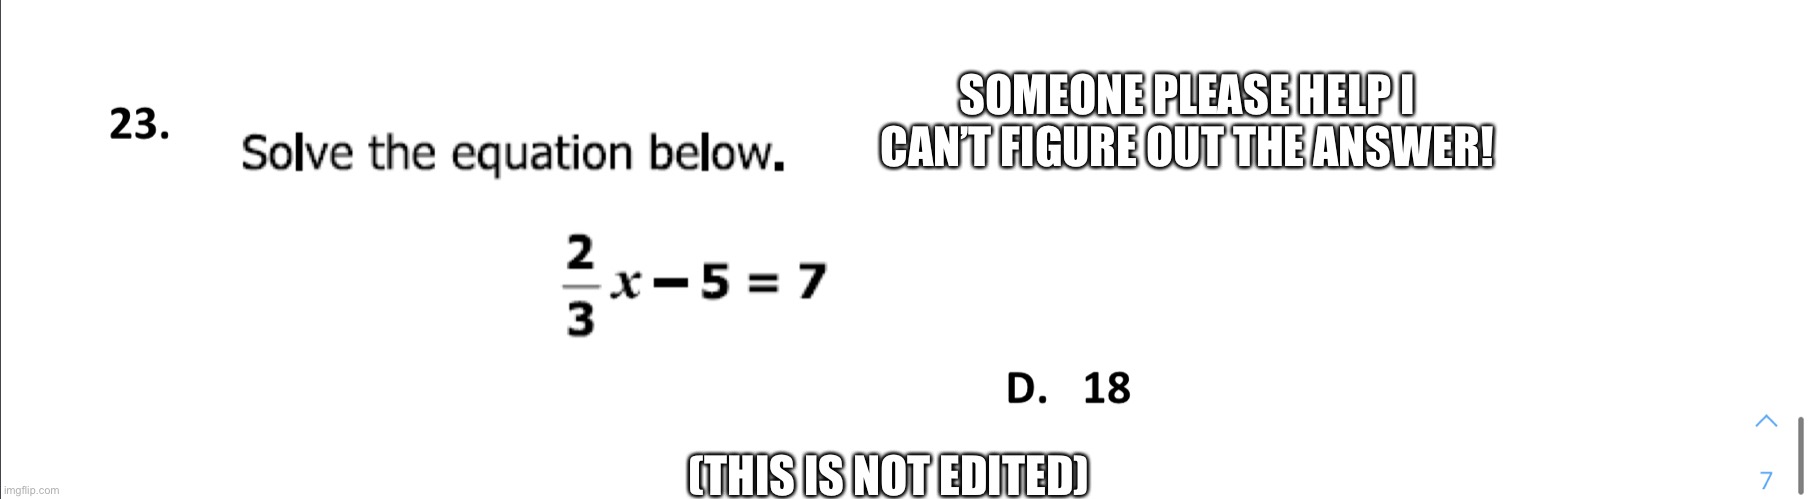 Help! | SOMEONE PLEASE HELP I CAN’T FIGURE OUT THE ANSWER! (THIS IS NOT EDITED) | image tagged in help,help me,math | made w/ Imgflip meme maker